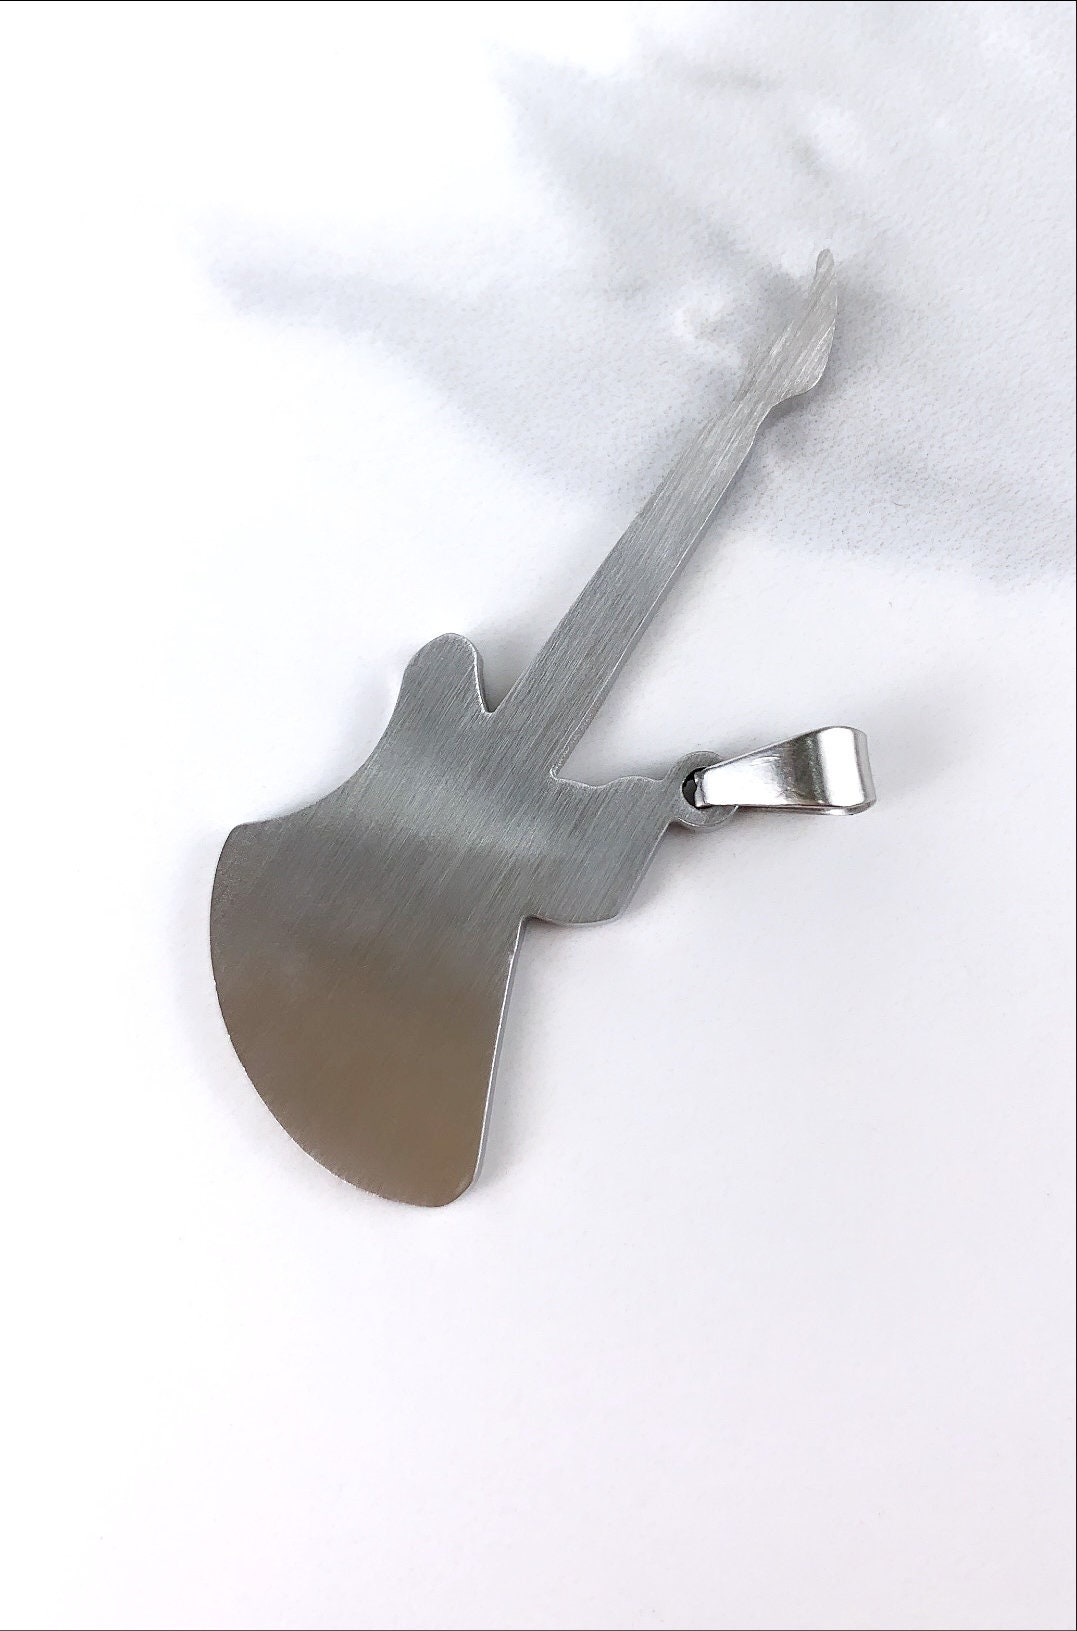 Stainless Steel Guitar Large or Medium  Pendants Wholesale Jewelry Supplies